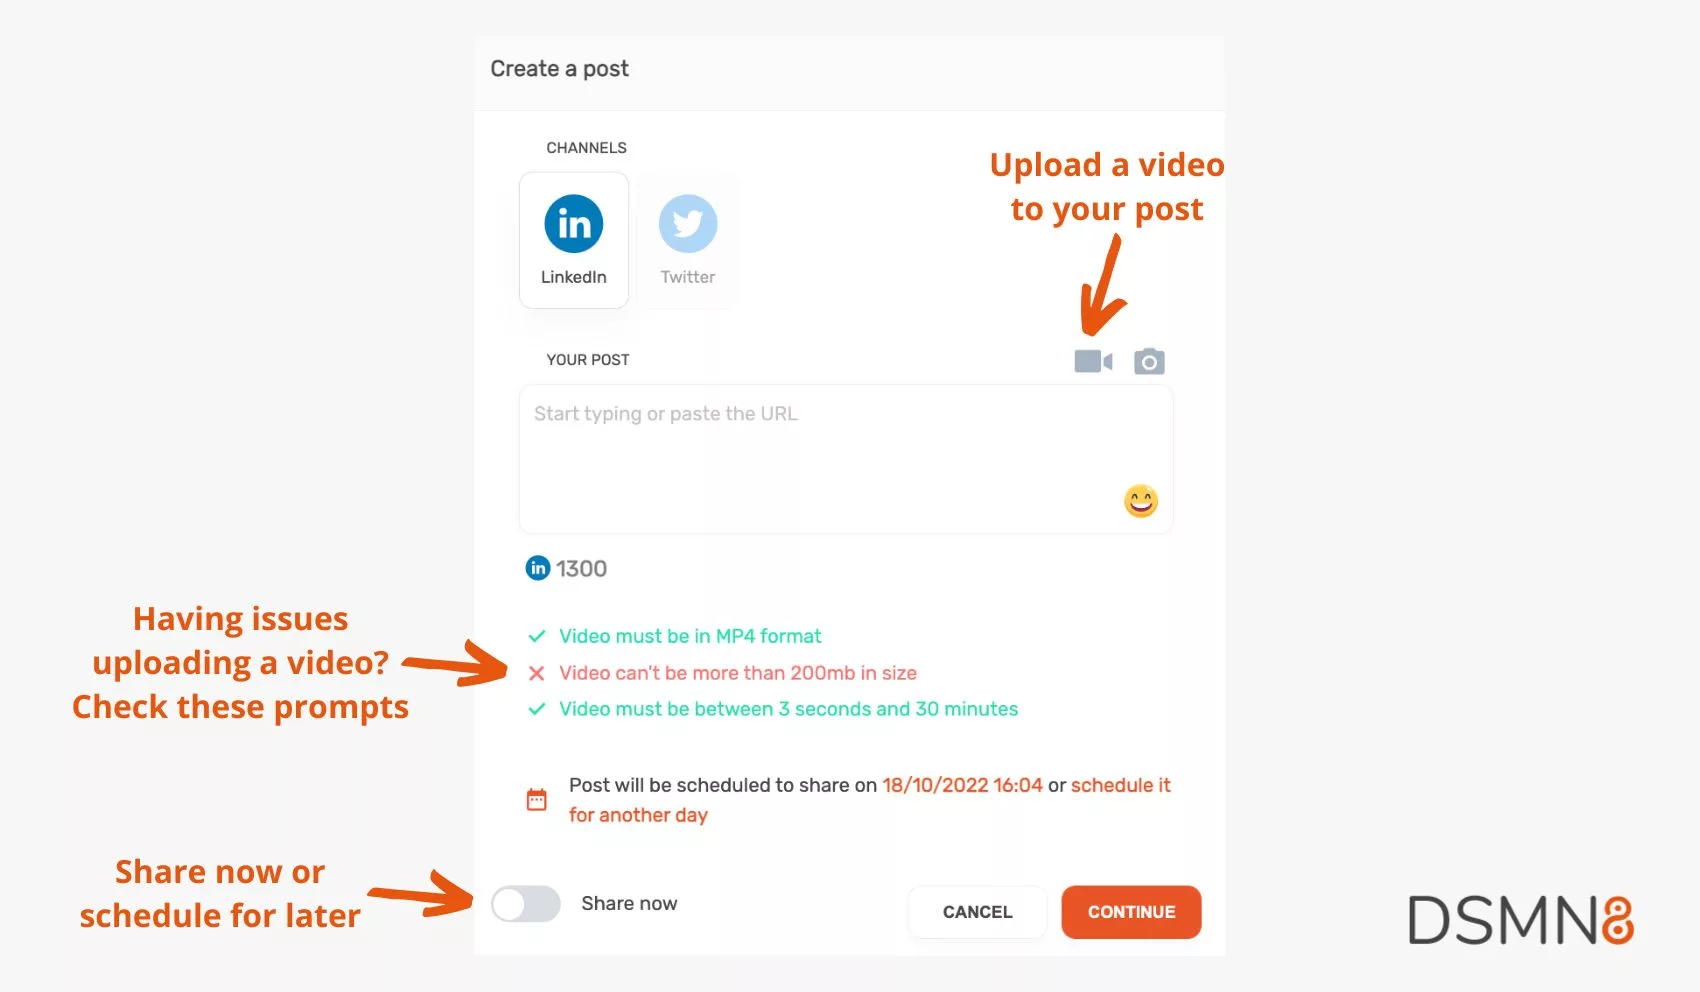 How to add video to post on DSMN8